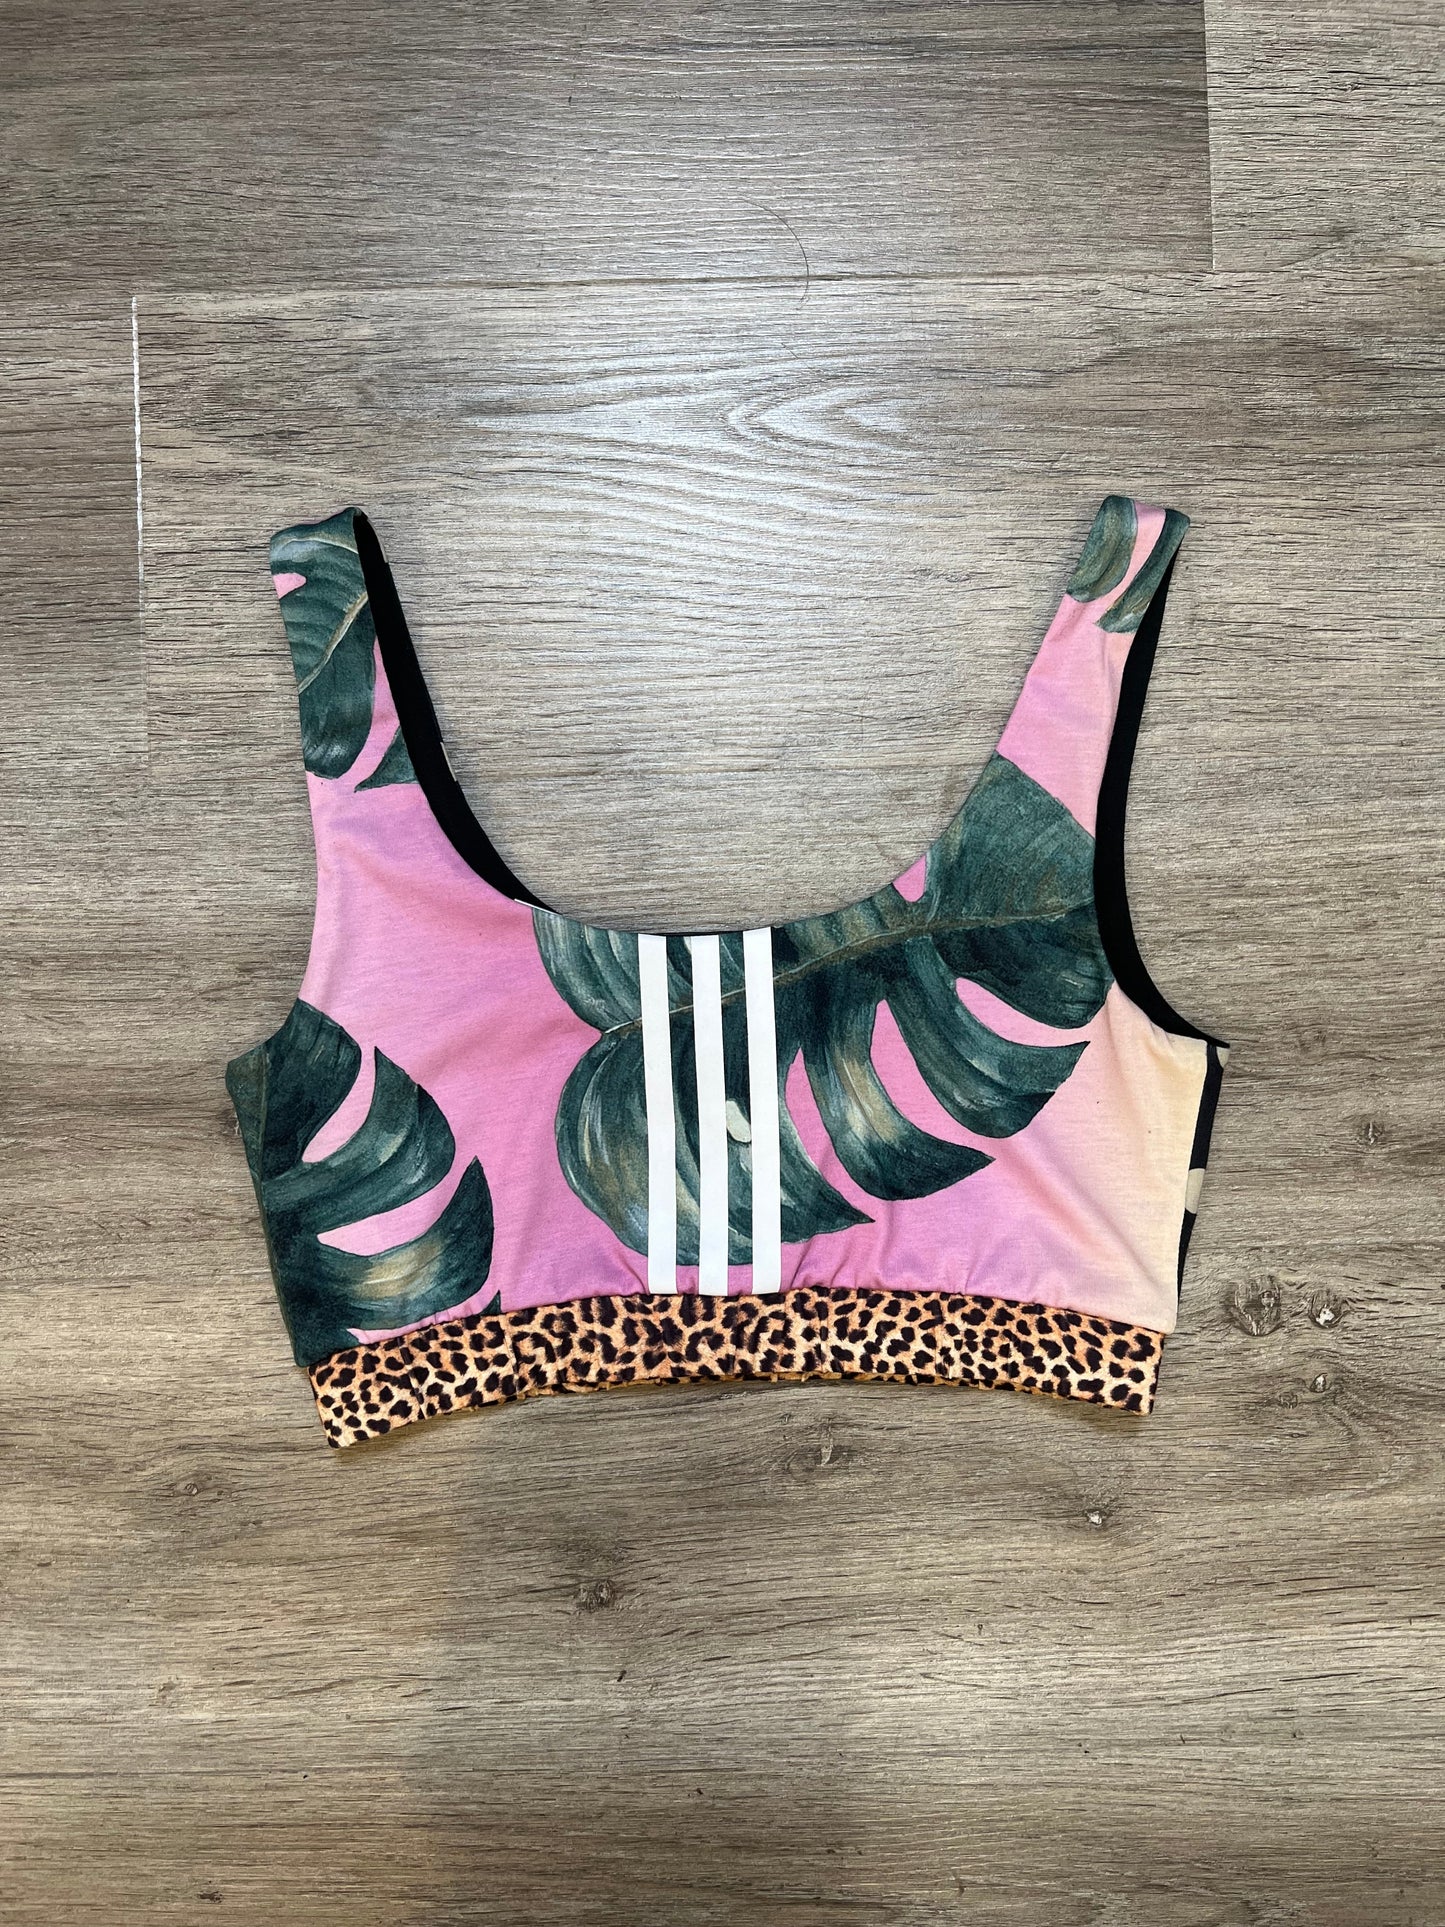 Athletic Bra By Adidas  Size: S